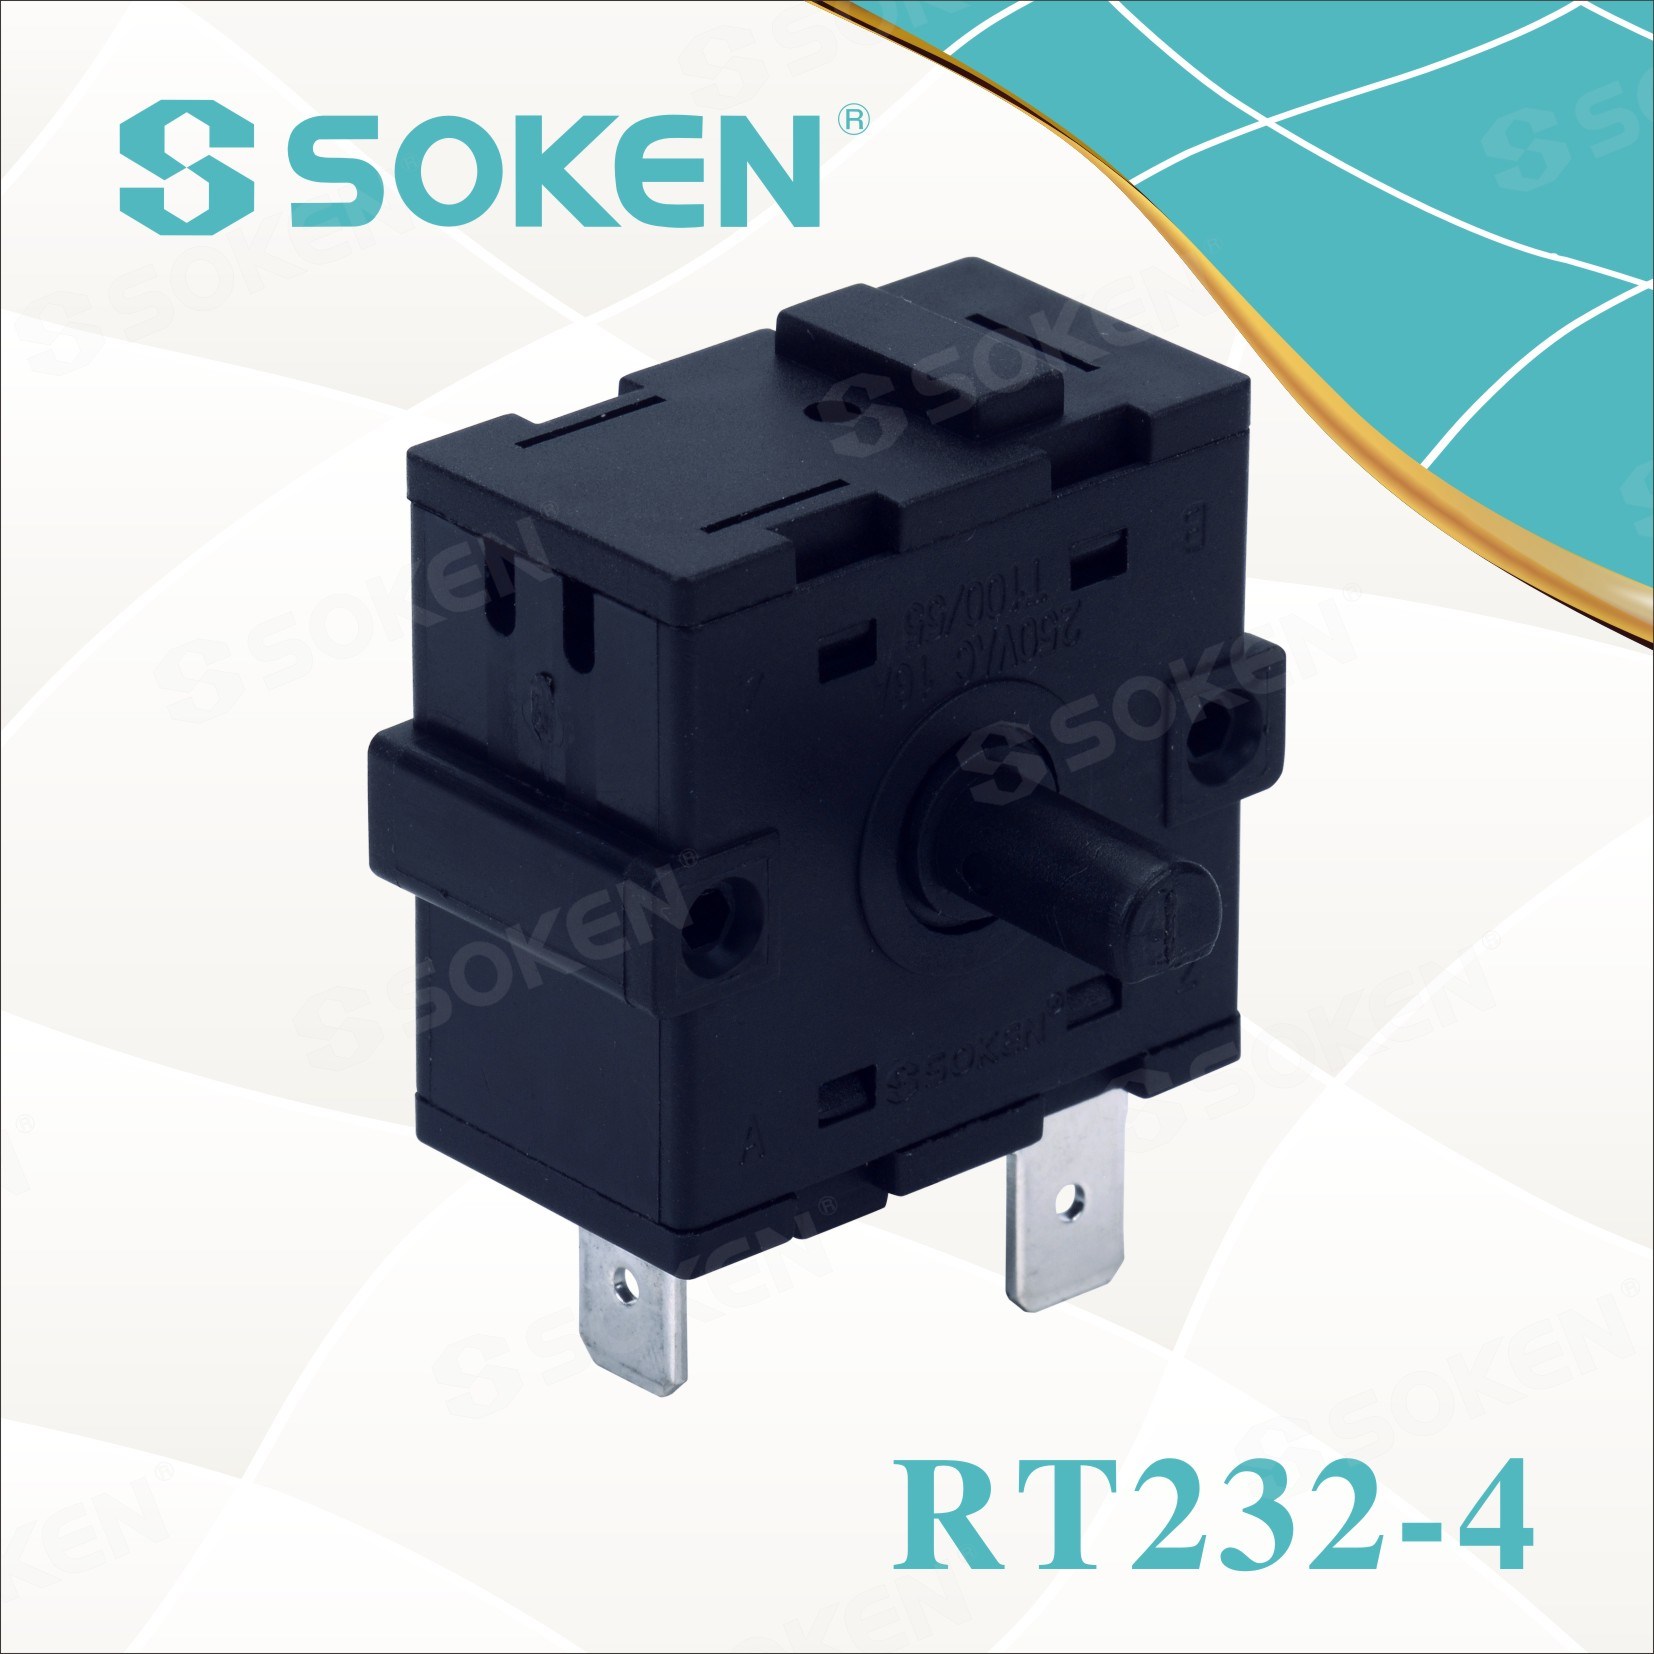 Well-designed Clipsal Switch - Soken Bremas Rotary Switch – Master Soken Electrical